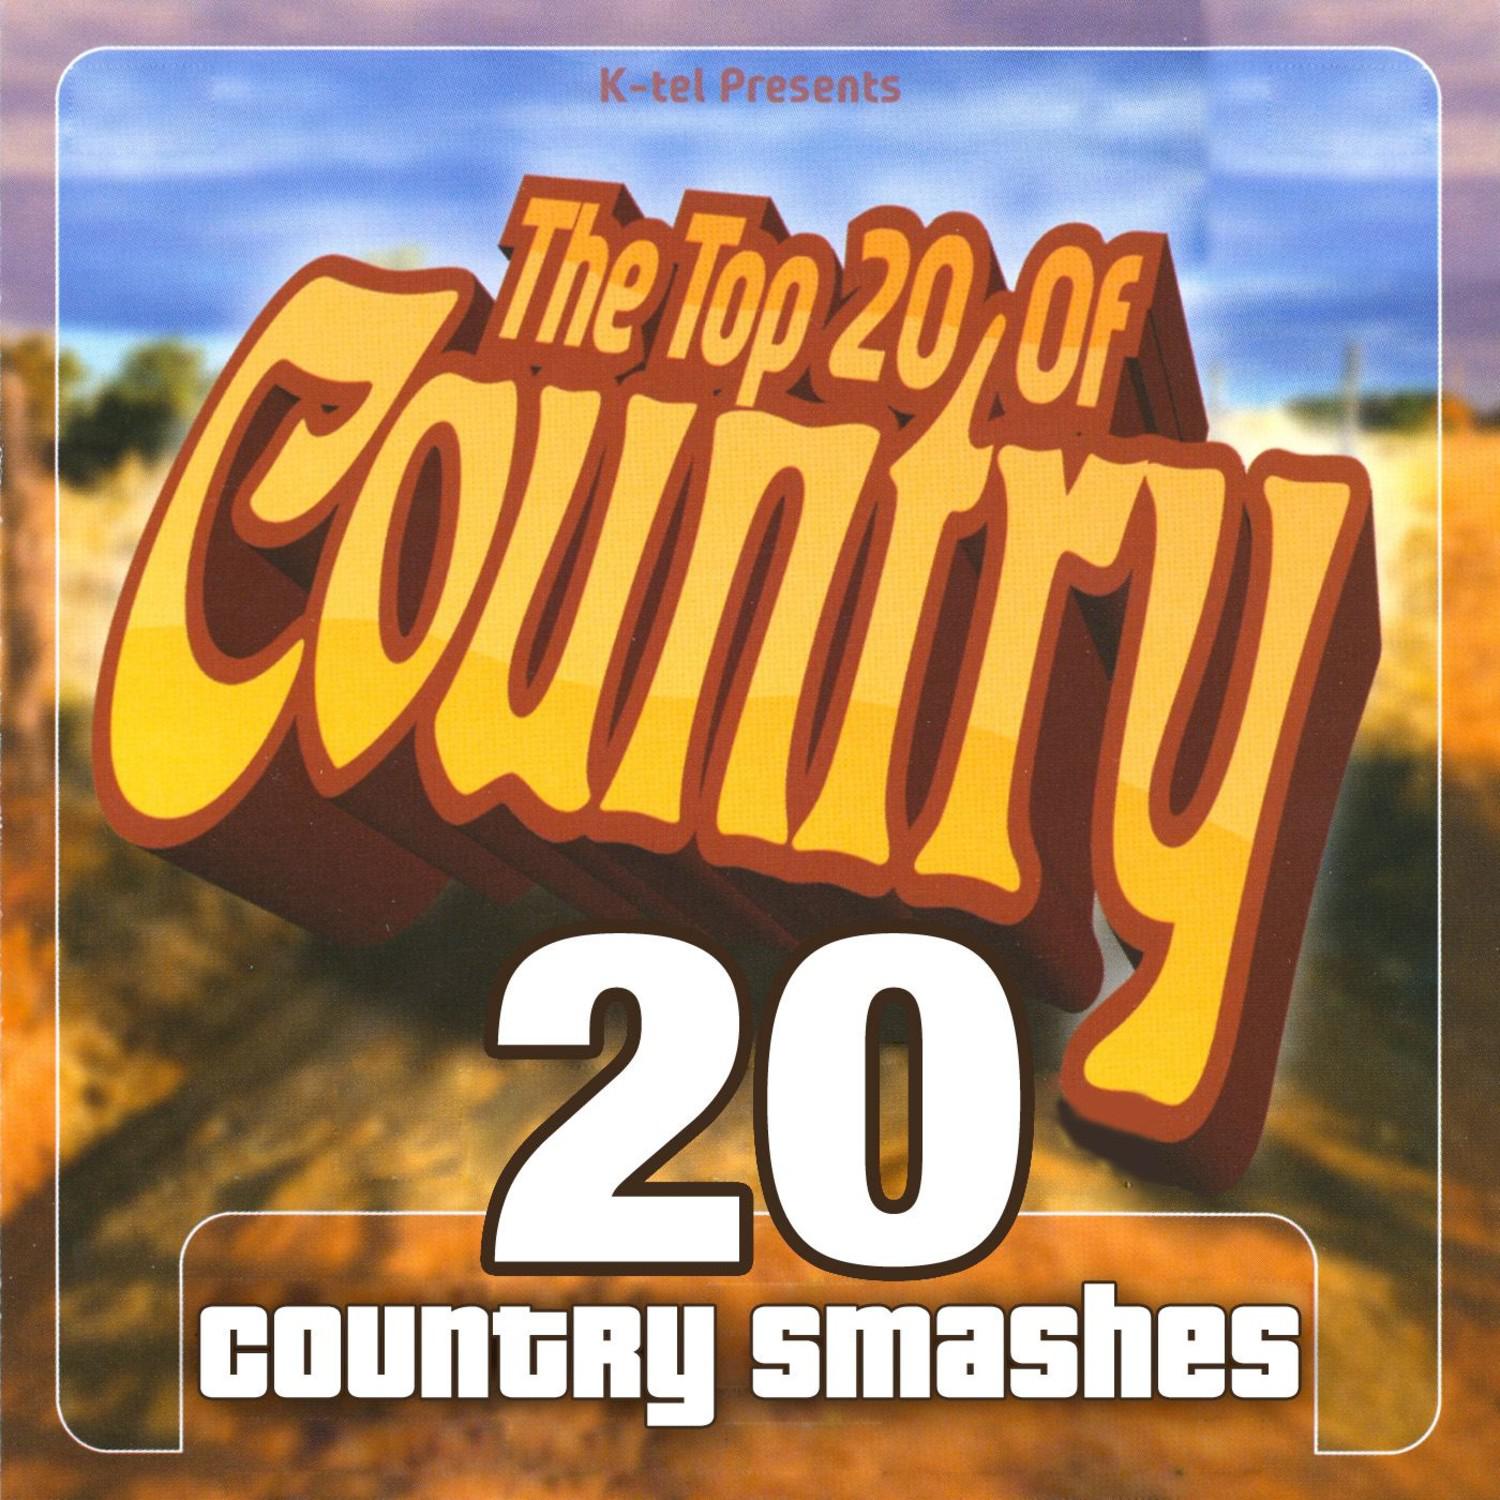 The Top 20 Of Country